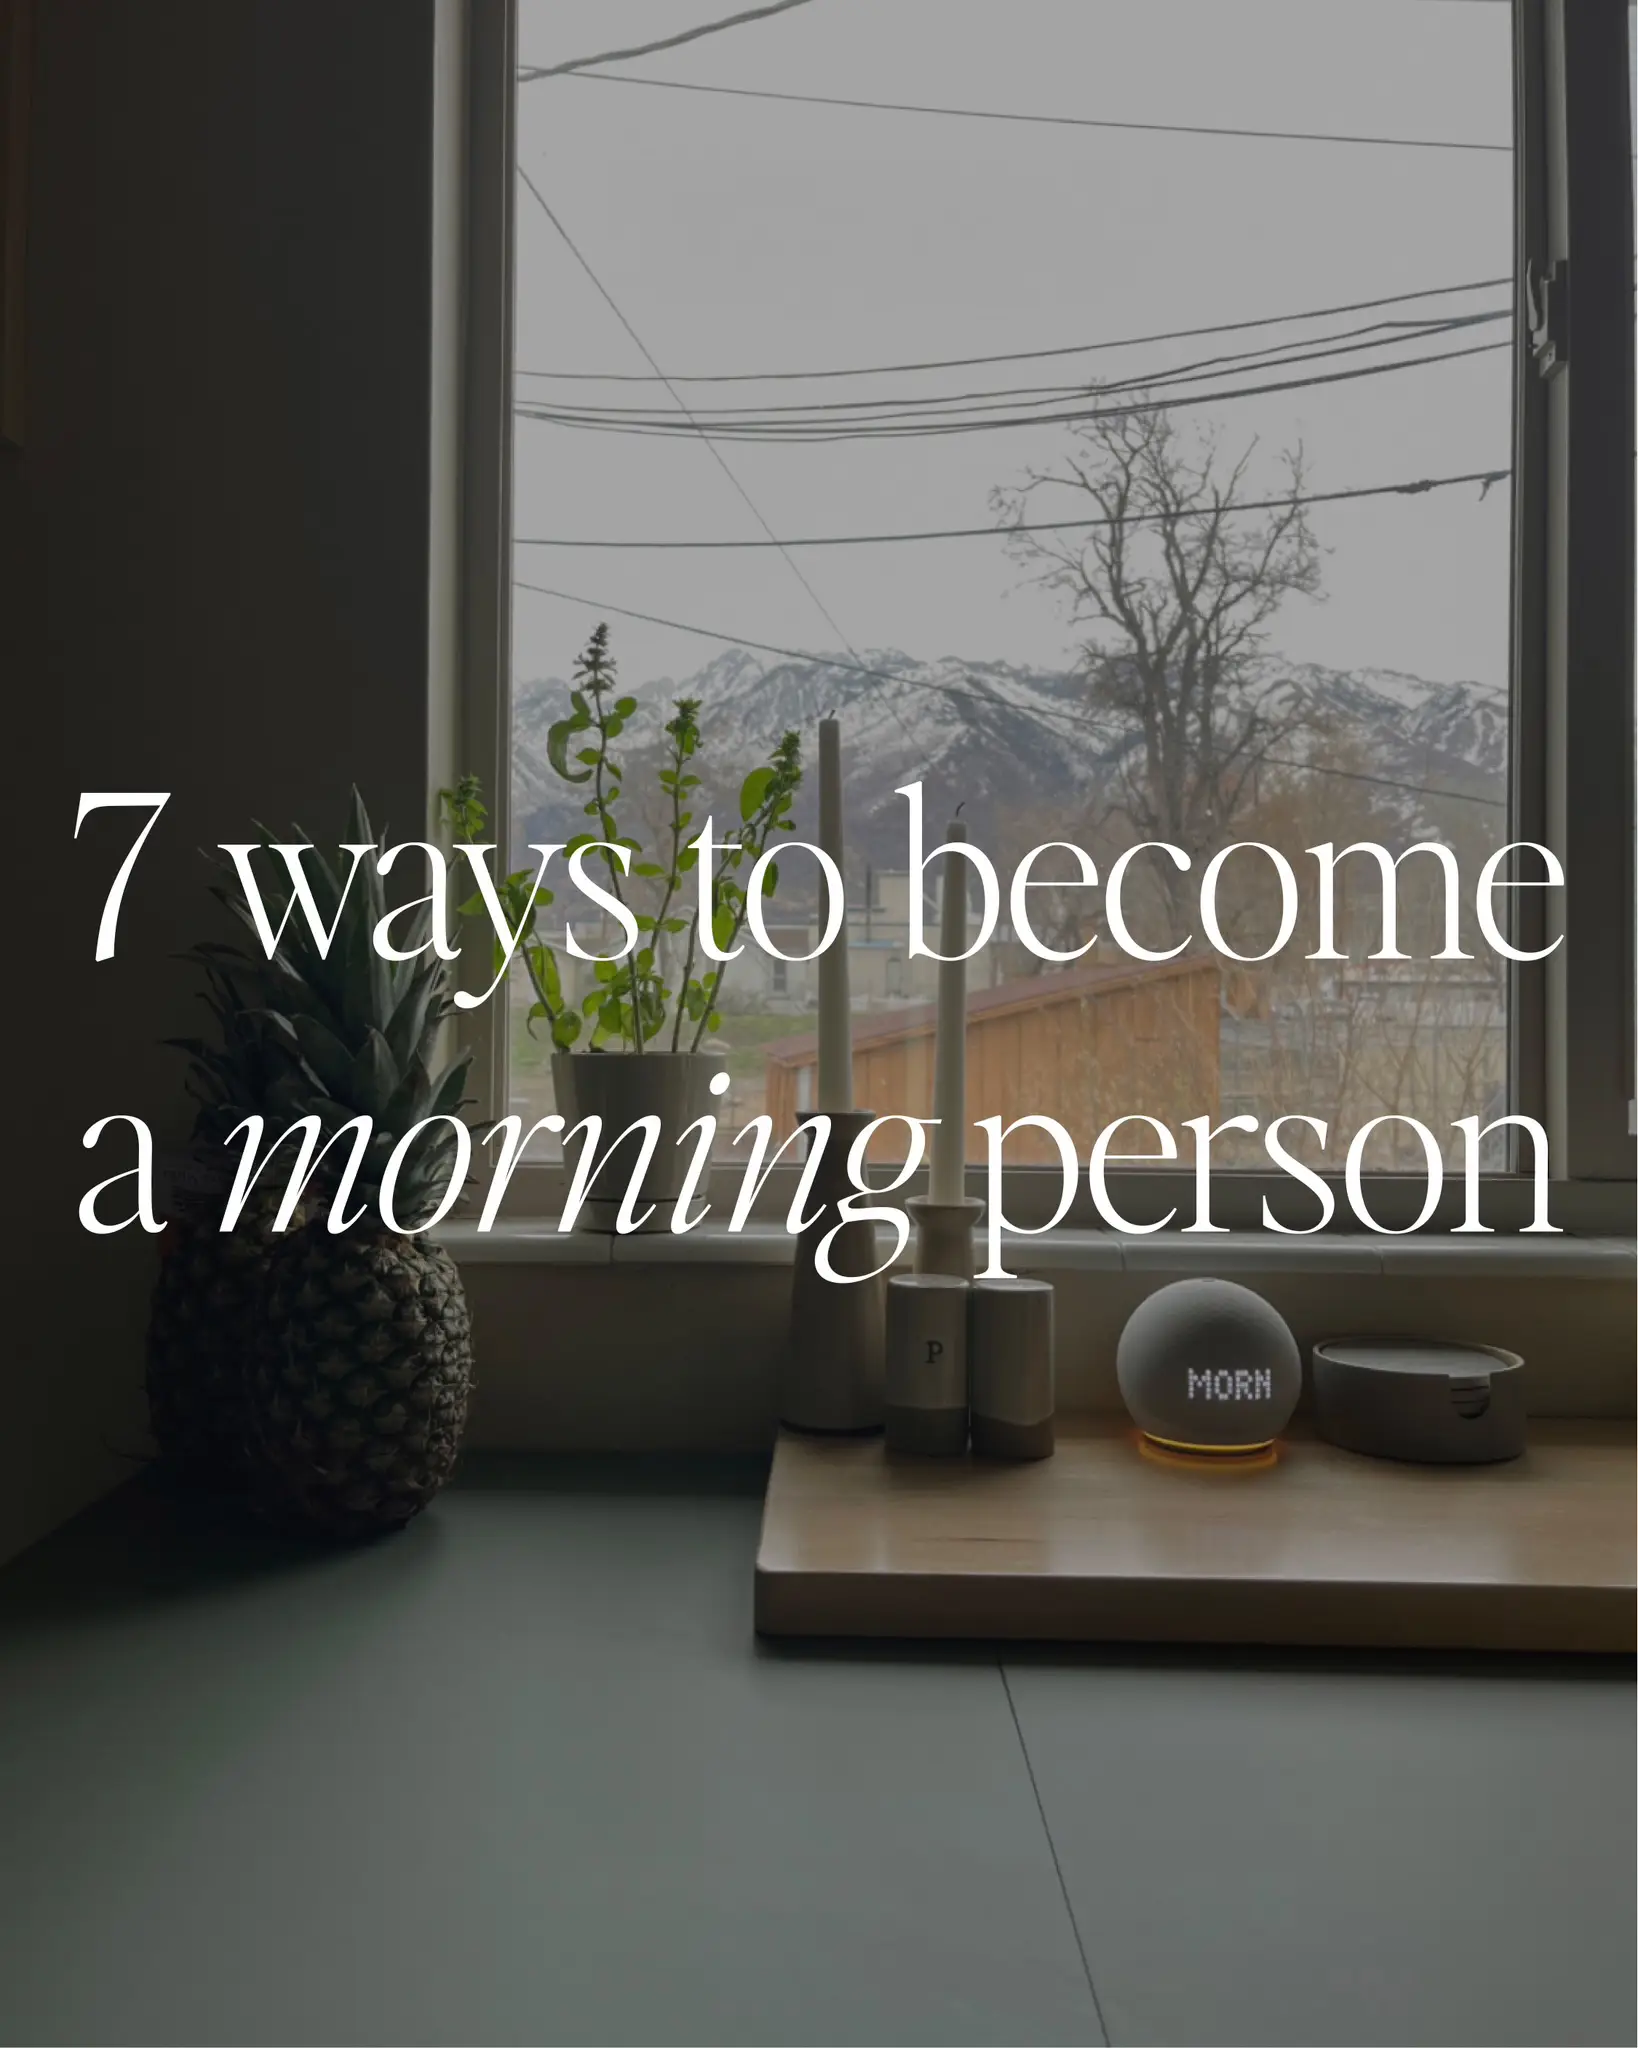 How to become. Morning person's images